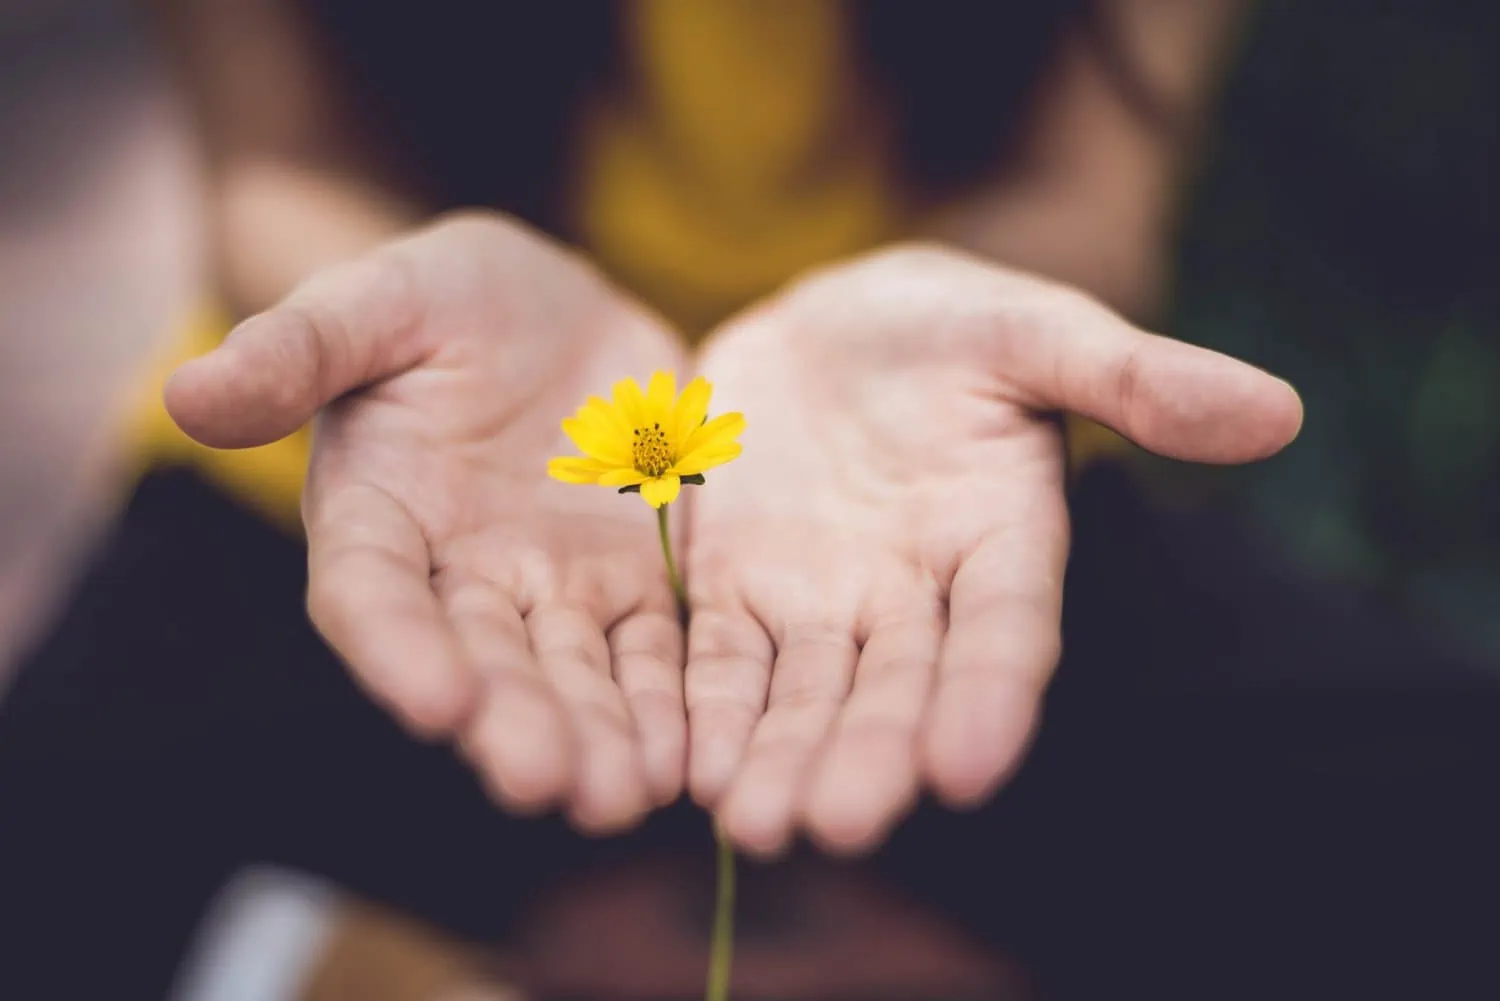 Woman in recovery mode after grief counseling holding a flower in her hands